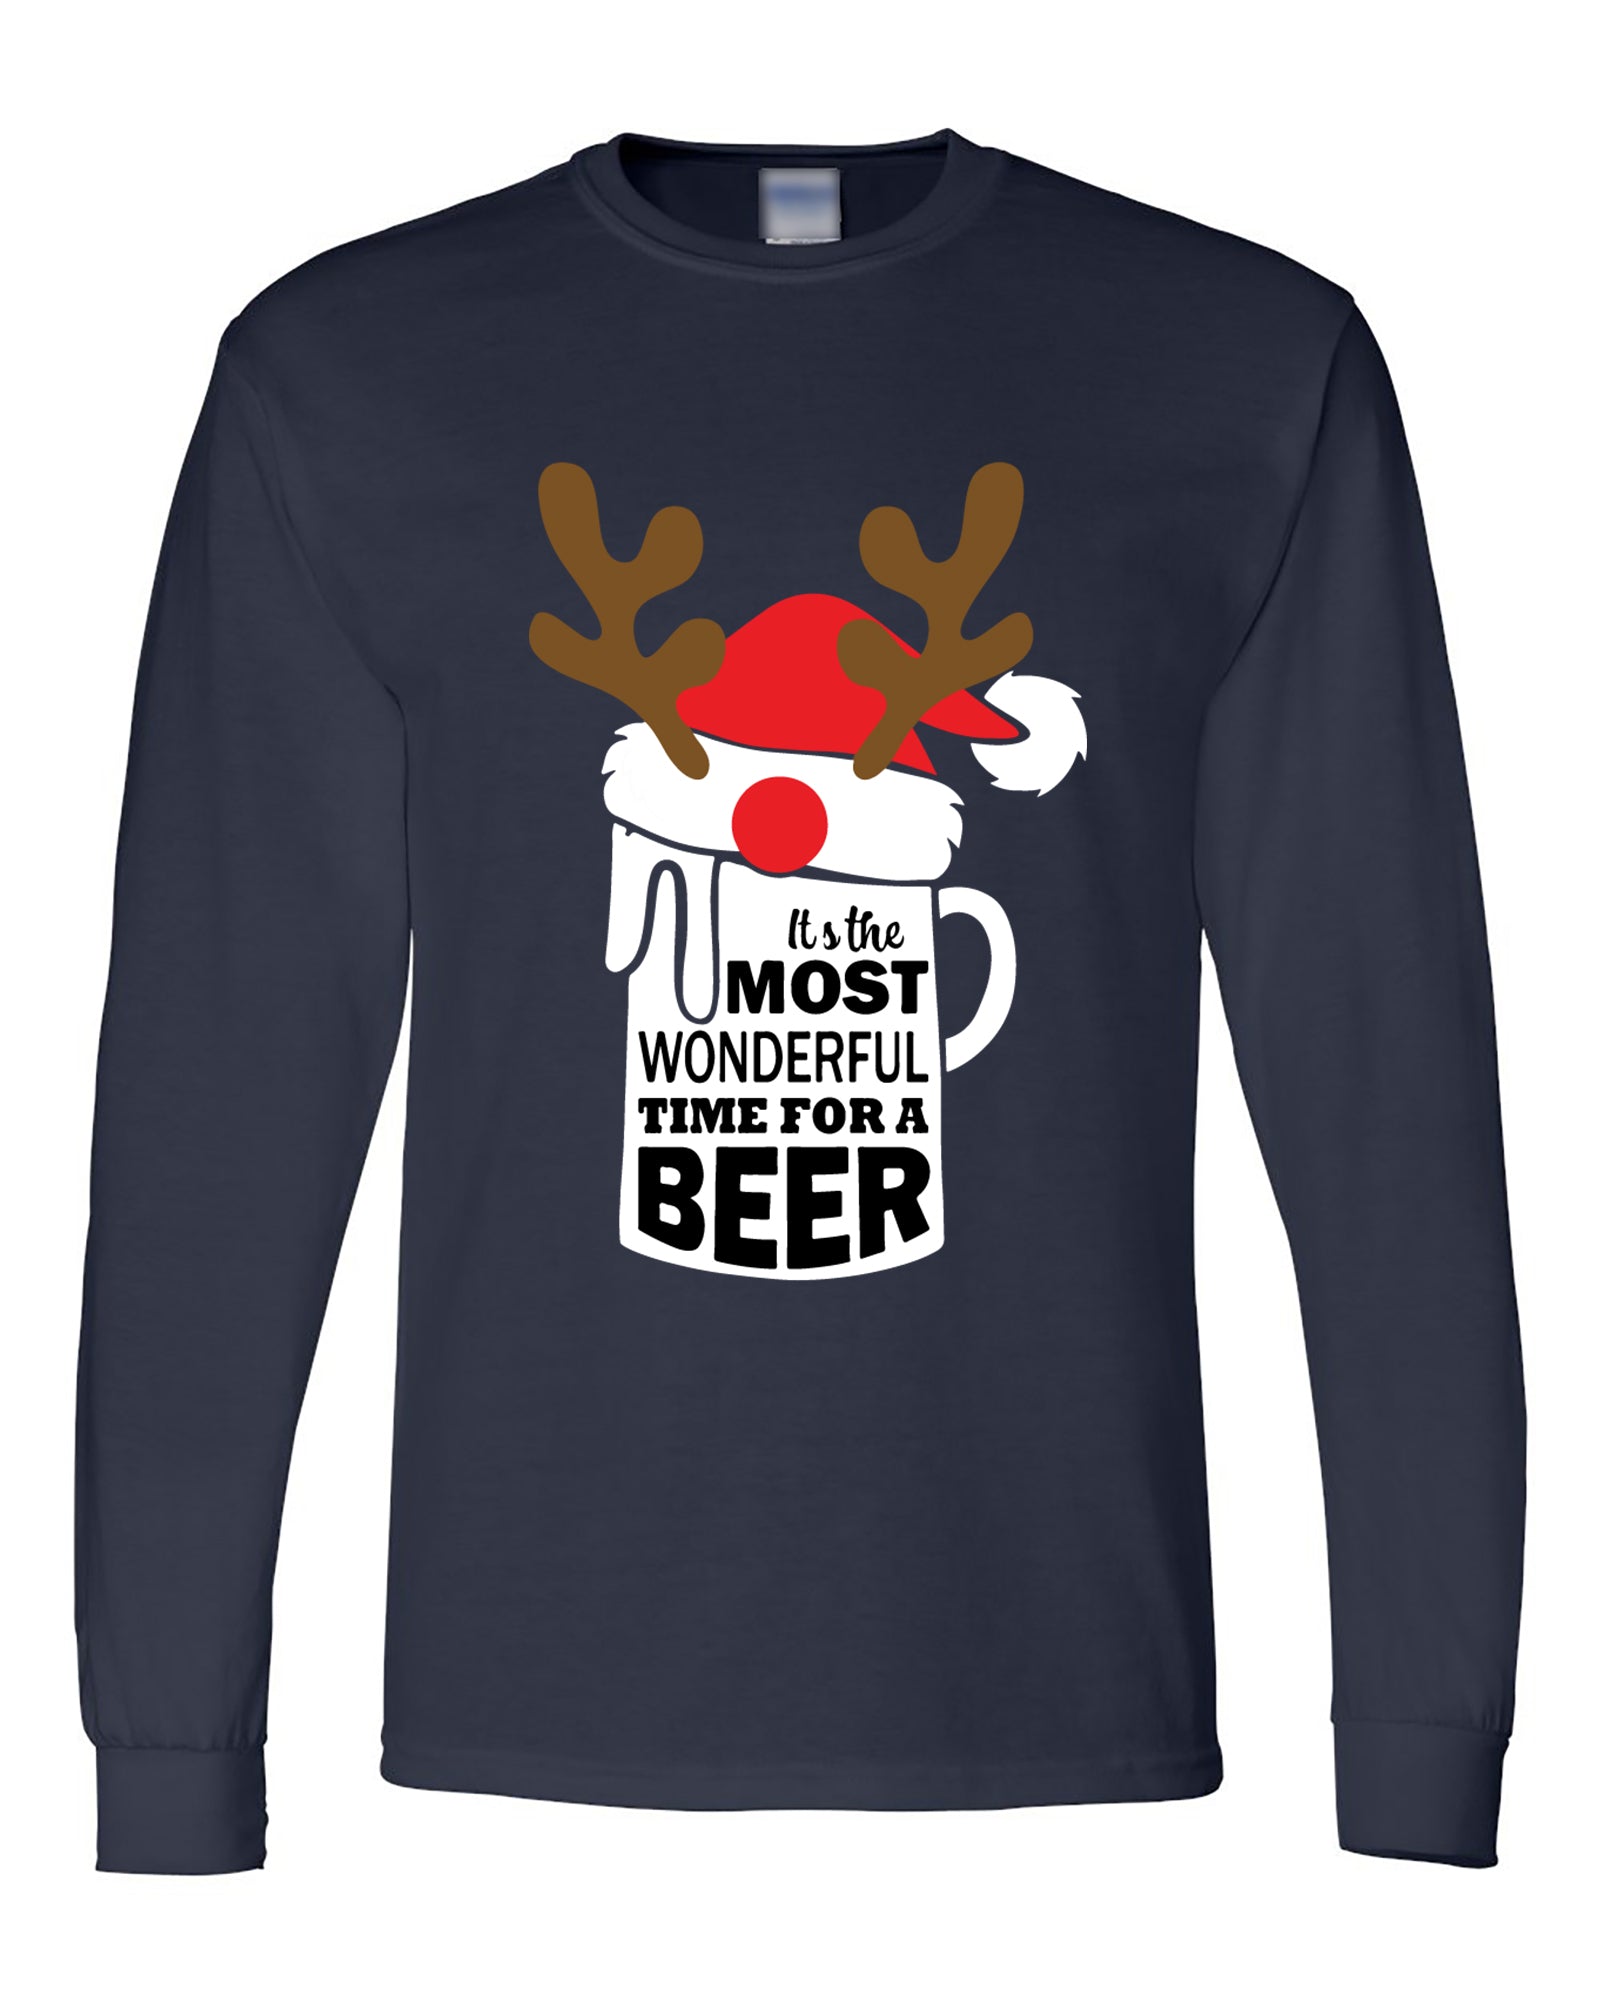 Time For A Beer Long Sleeve Shirt - ApparelinClick